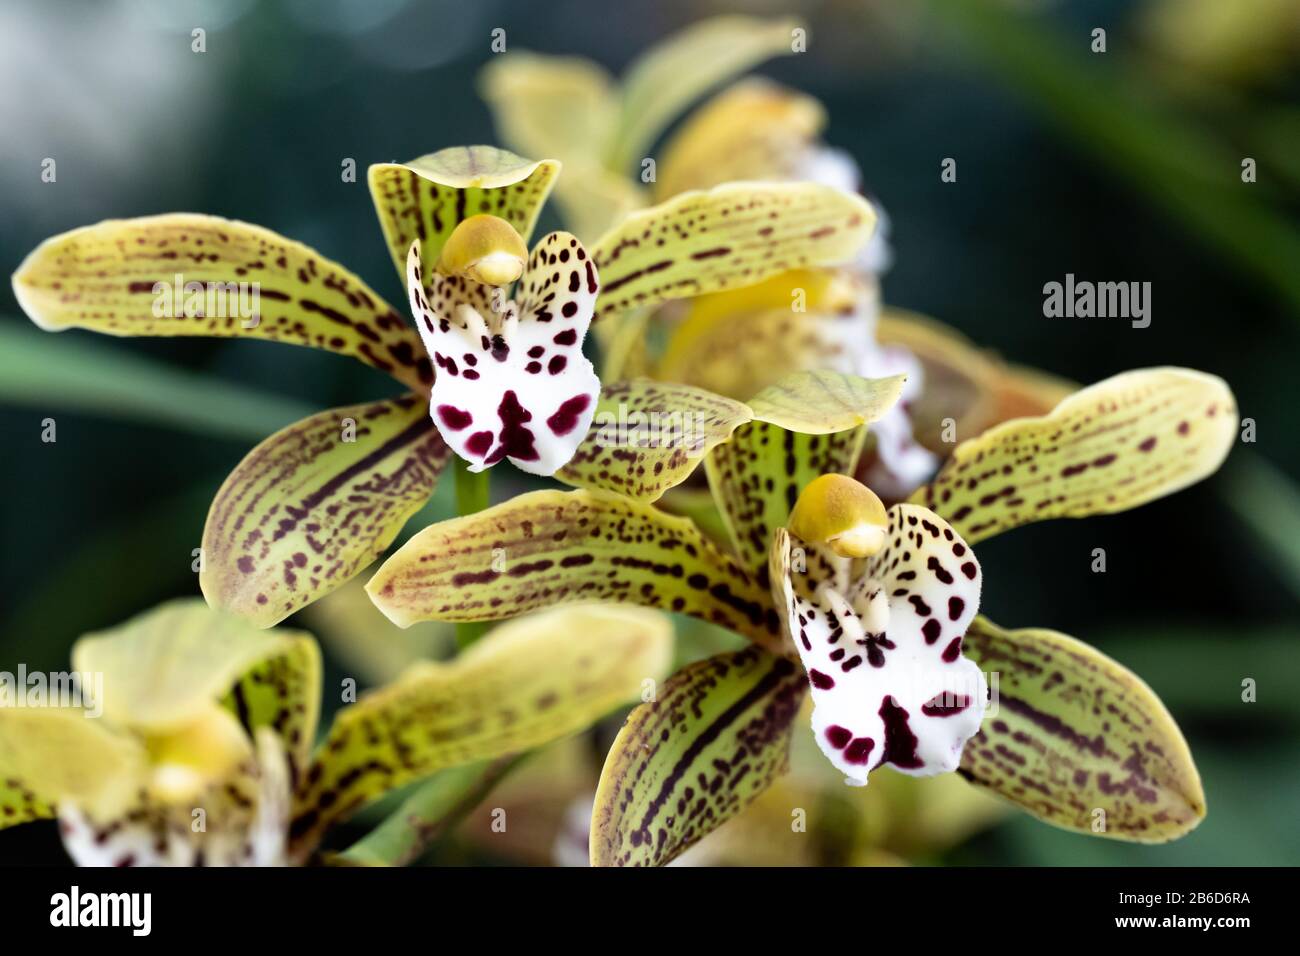 Beaterfull Cymbidium magic chocolate orchid close up. Cymbidium commonly known as boat orchids Stock Photo